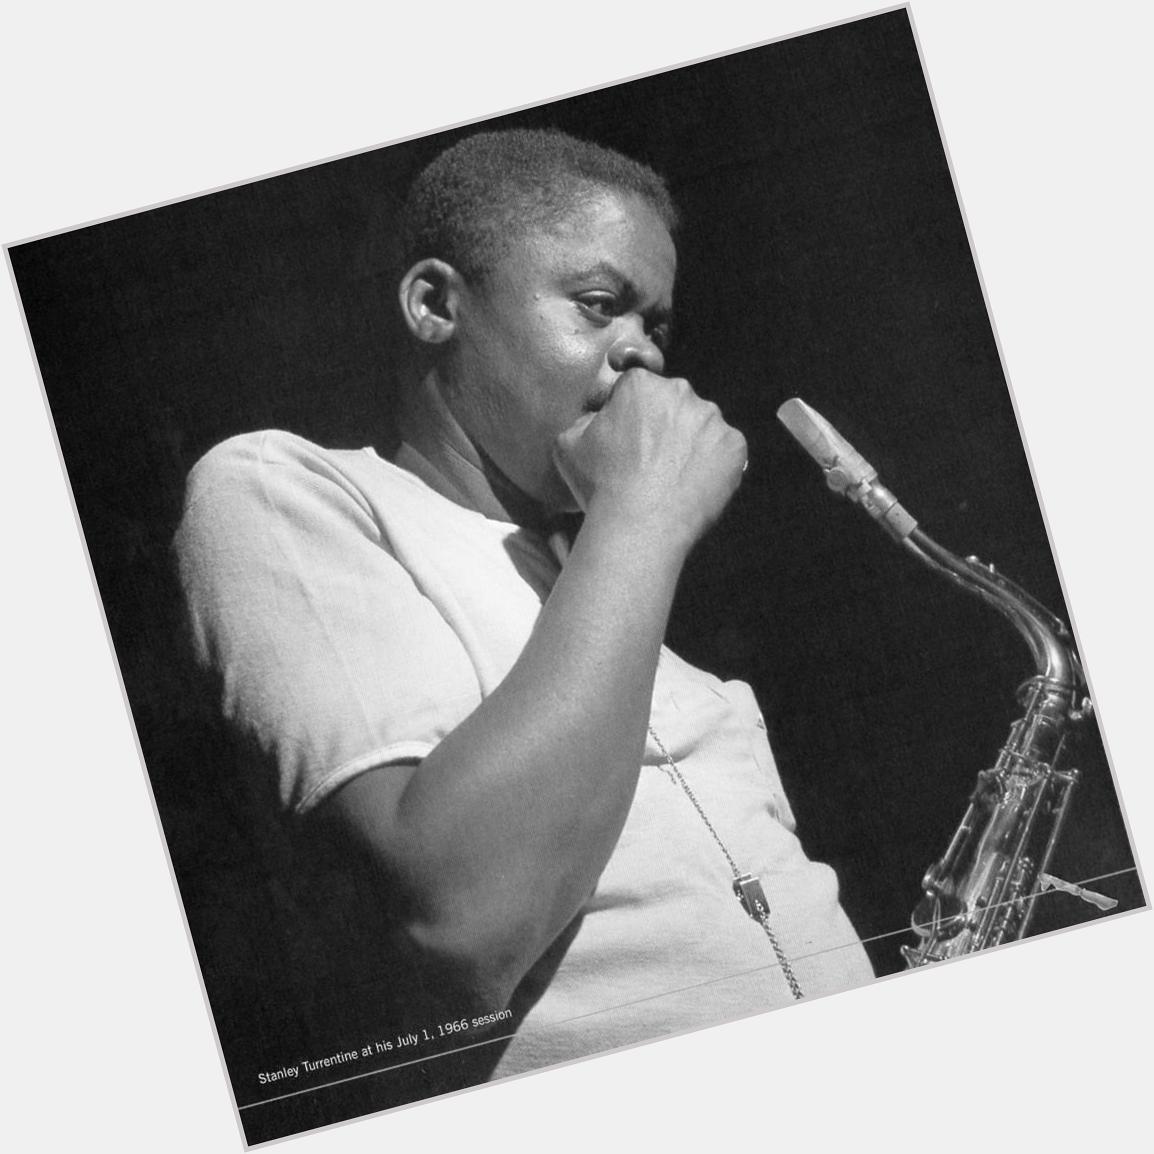 Happy Birthday, Stanley Turrentine! He would have been 81 today. Thank you for the music, Mr T... 